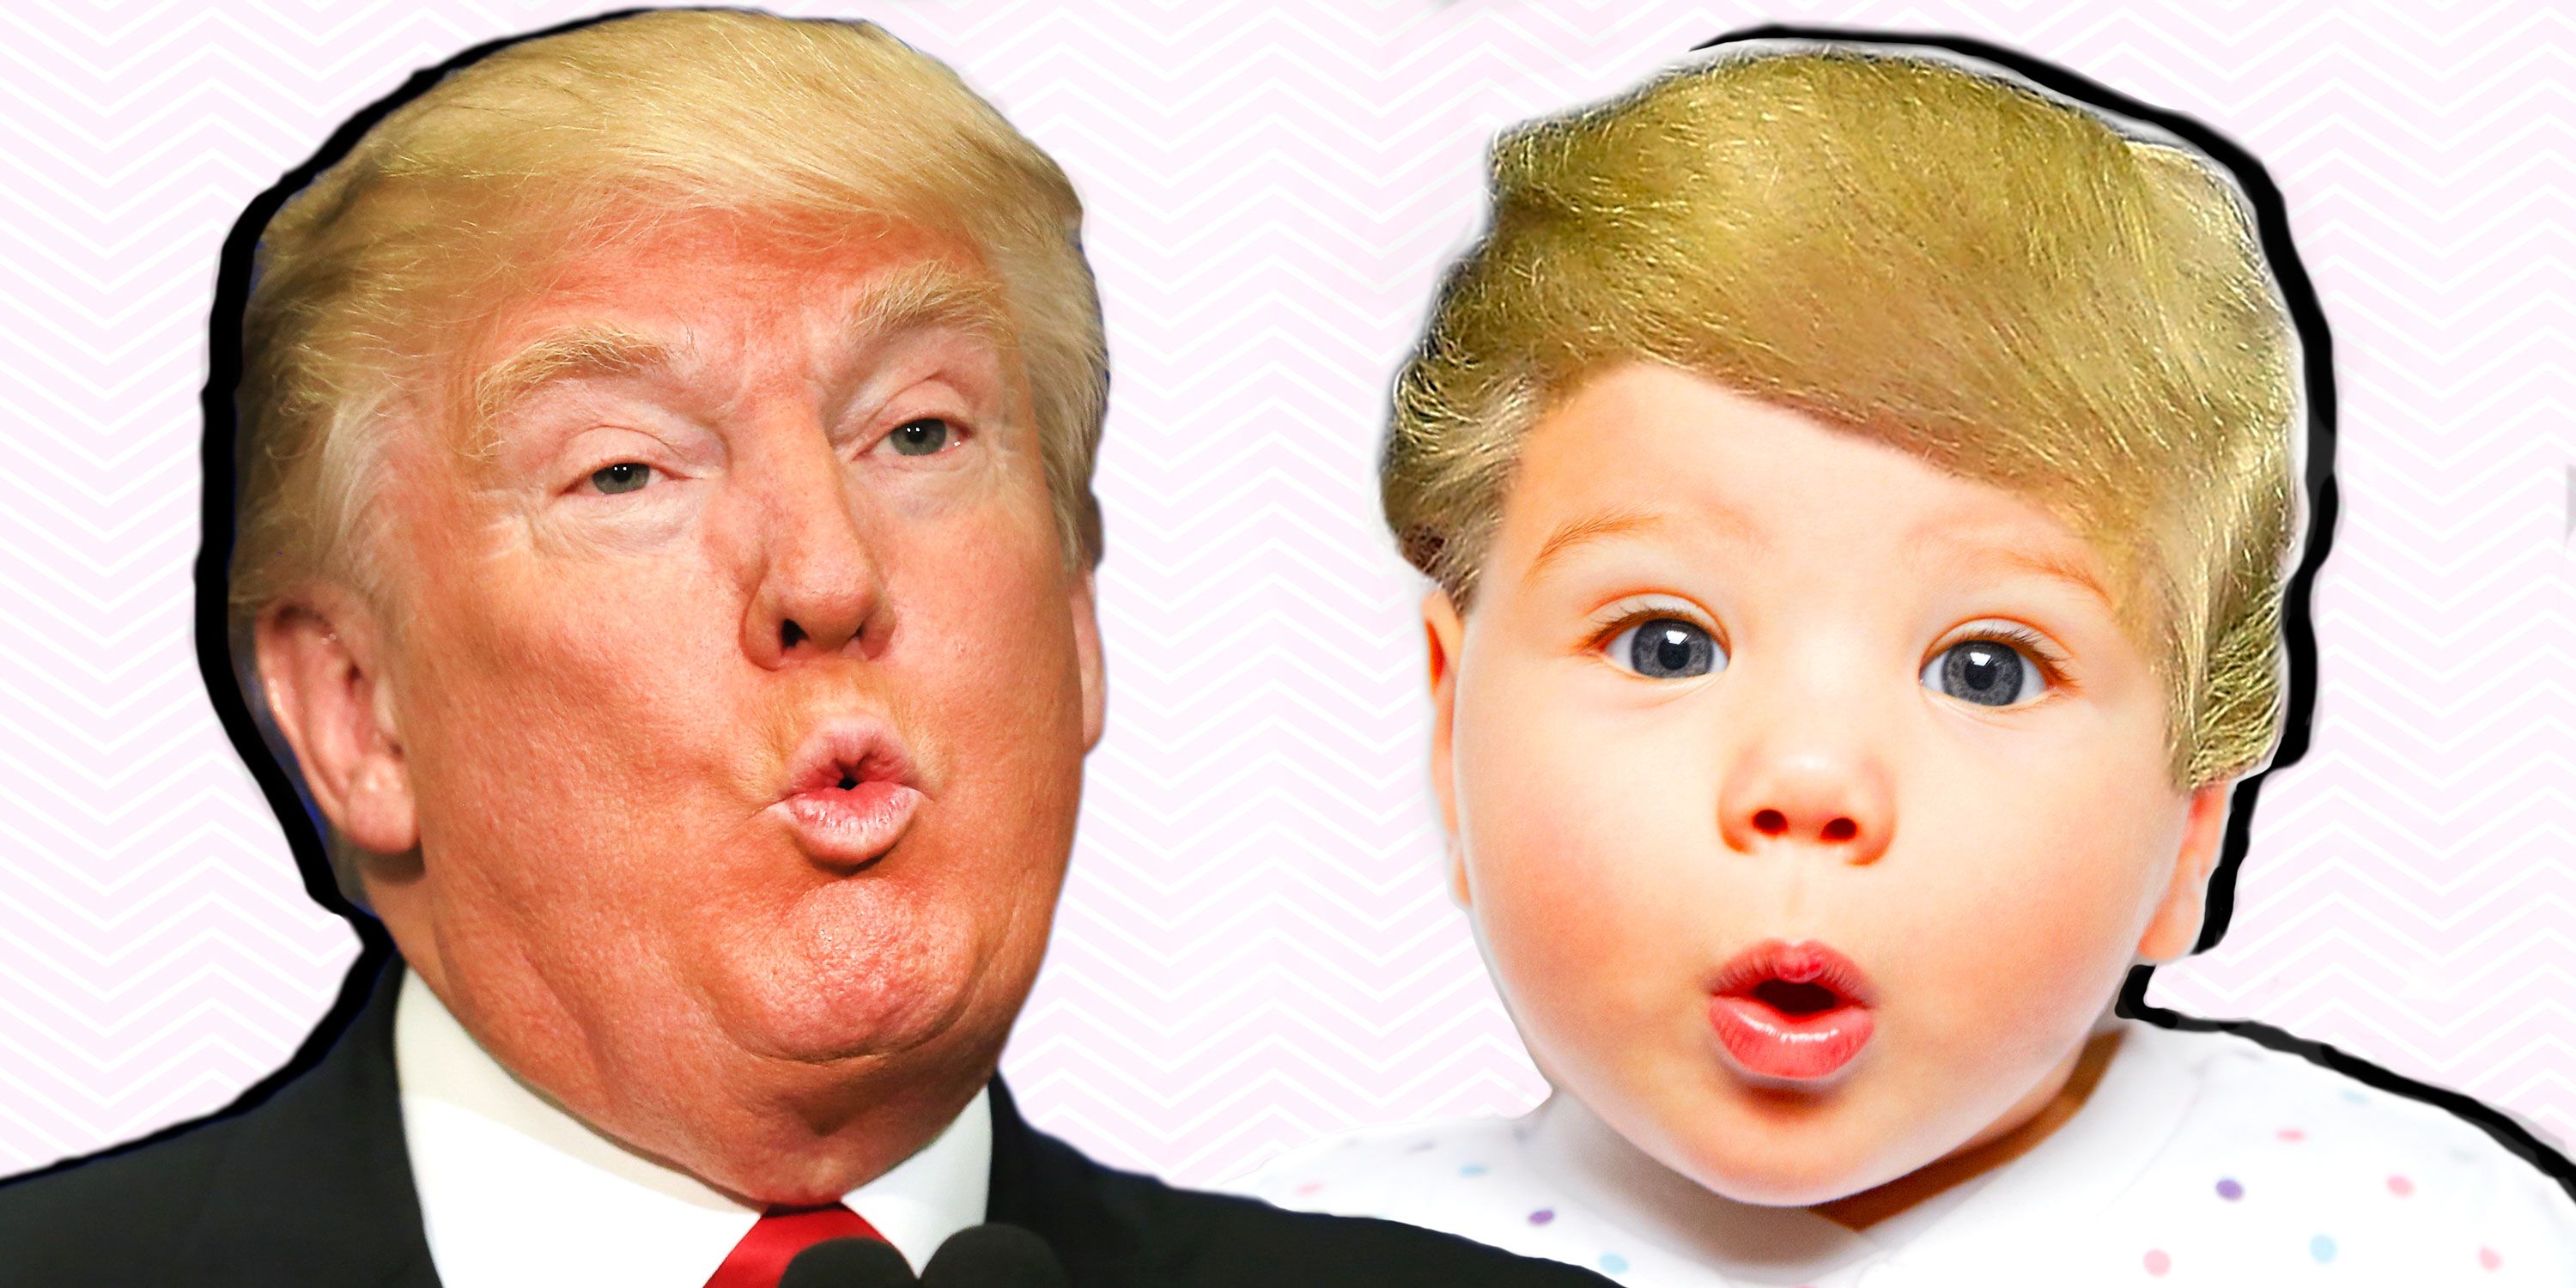 18 Ways Your Baby Is Just Like Donald Trump